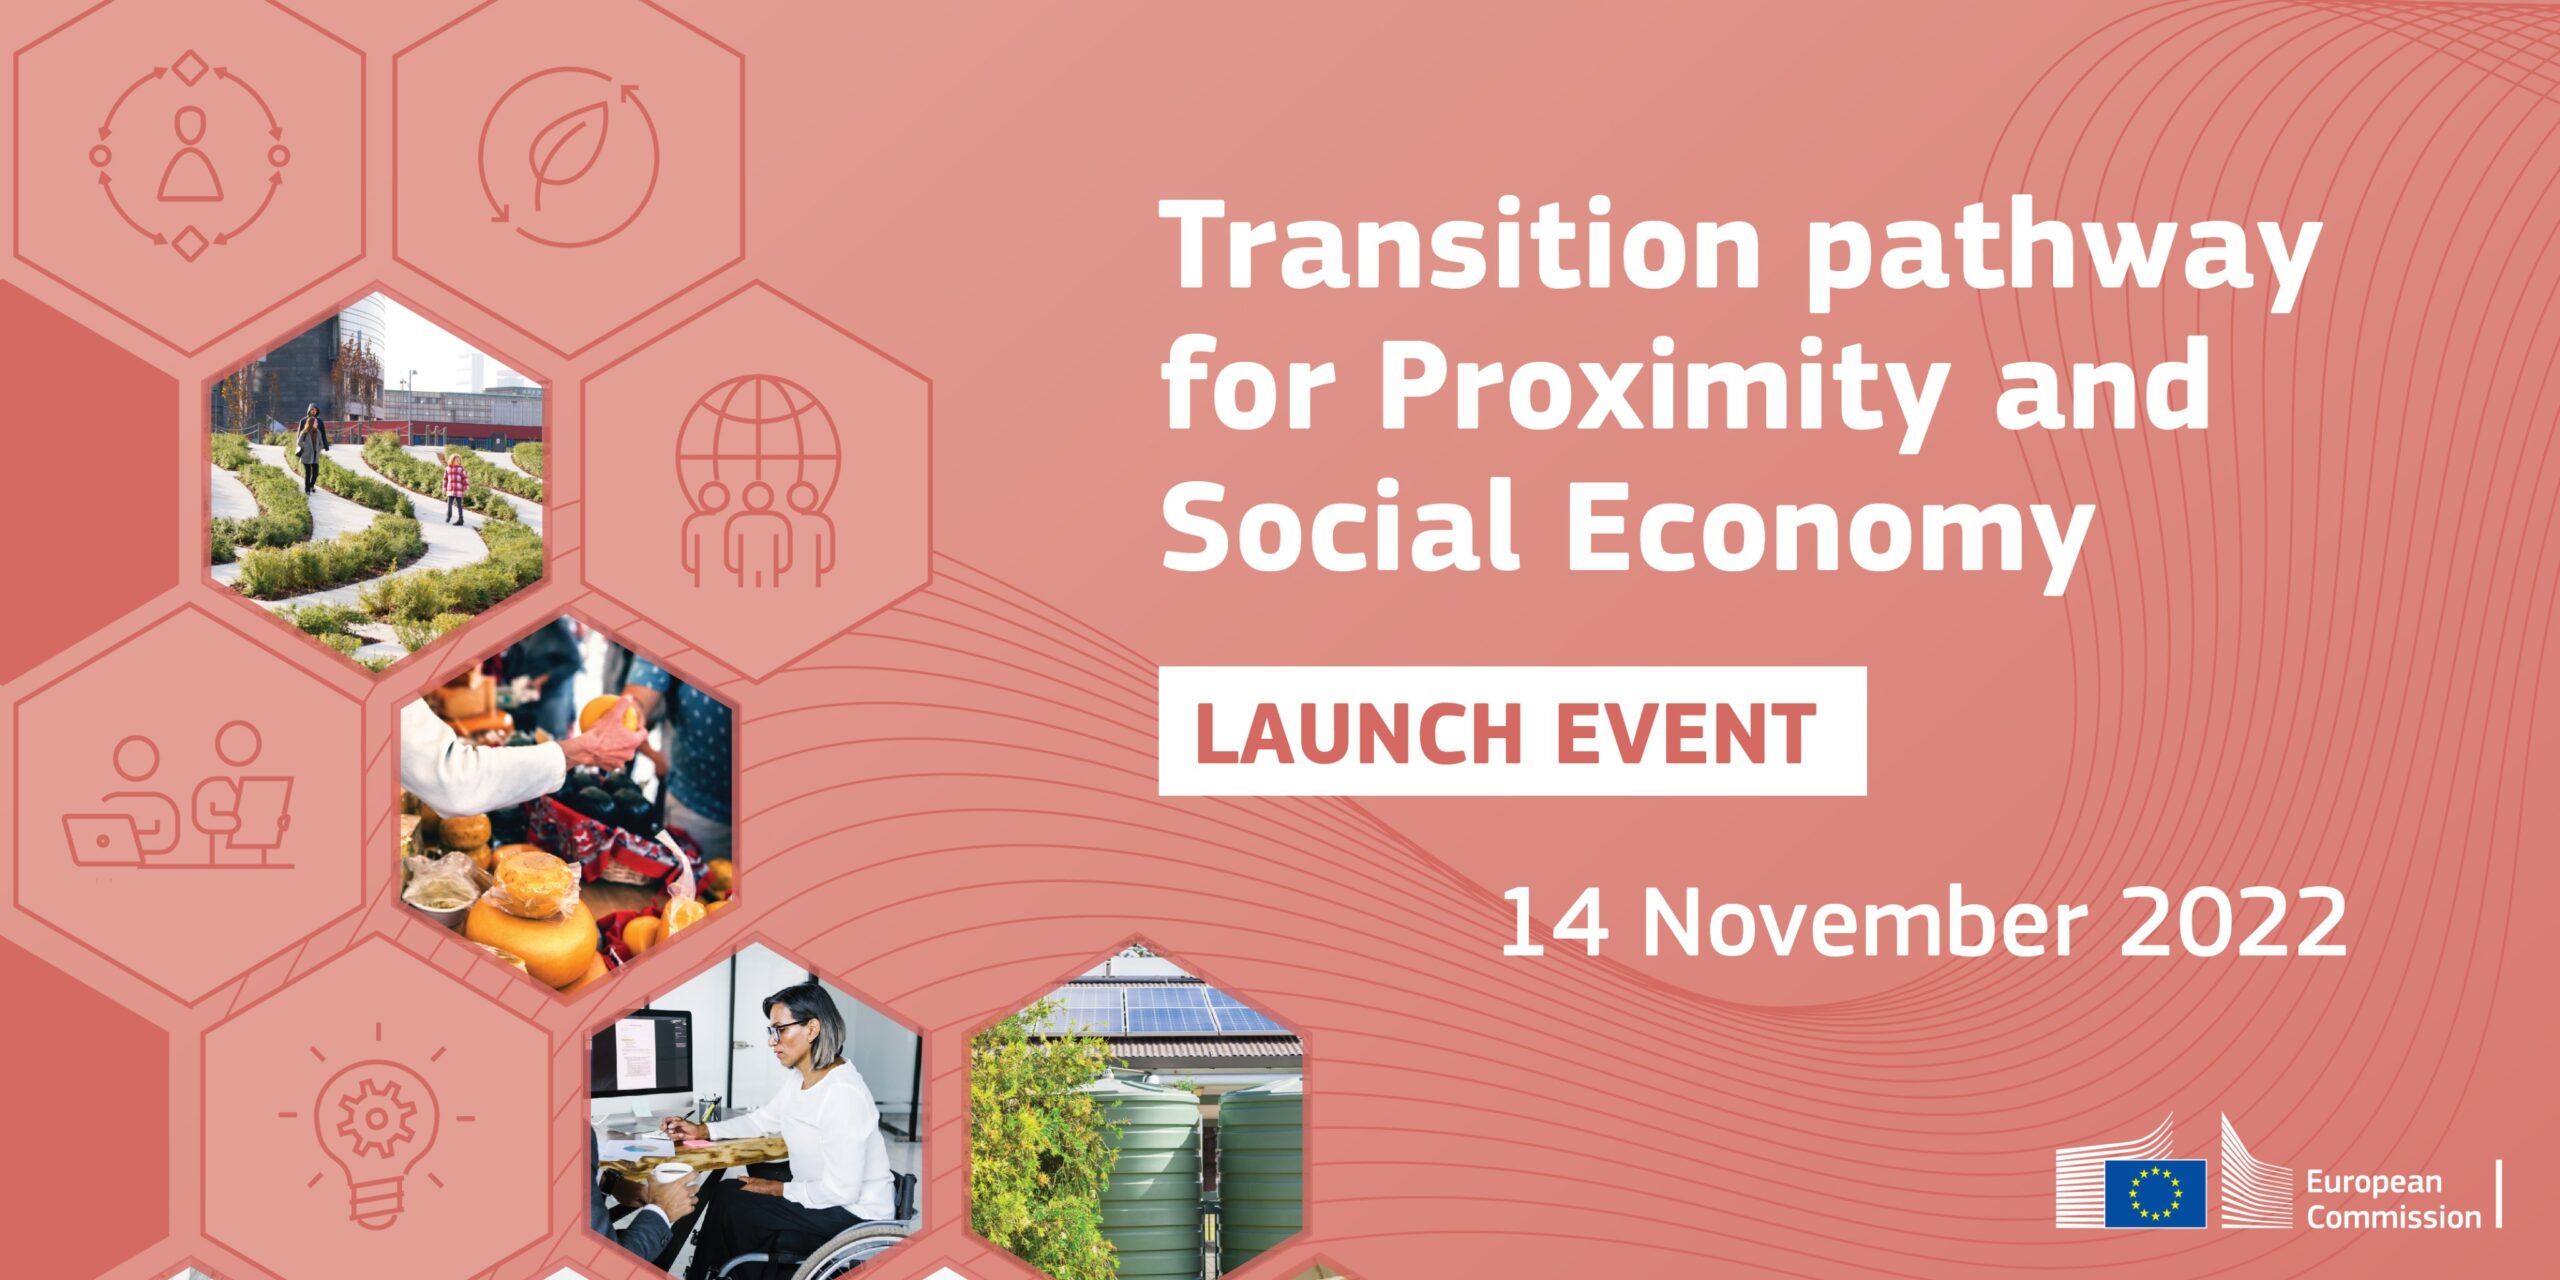 A Transition Pathway for the Proximity & Social Economy ecosystem